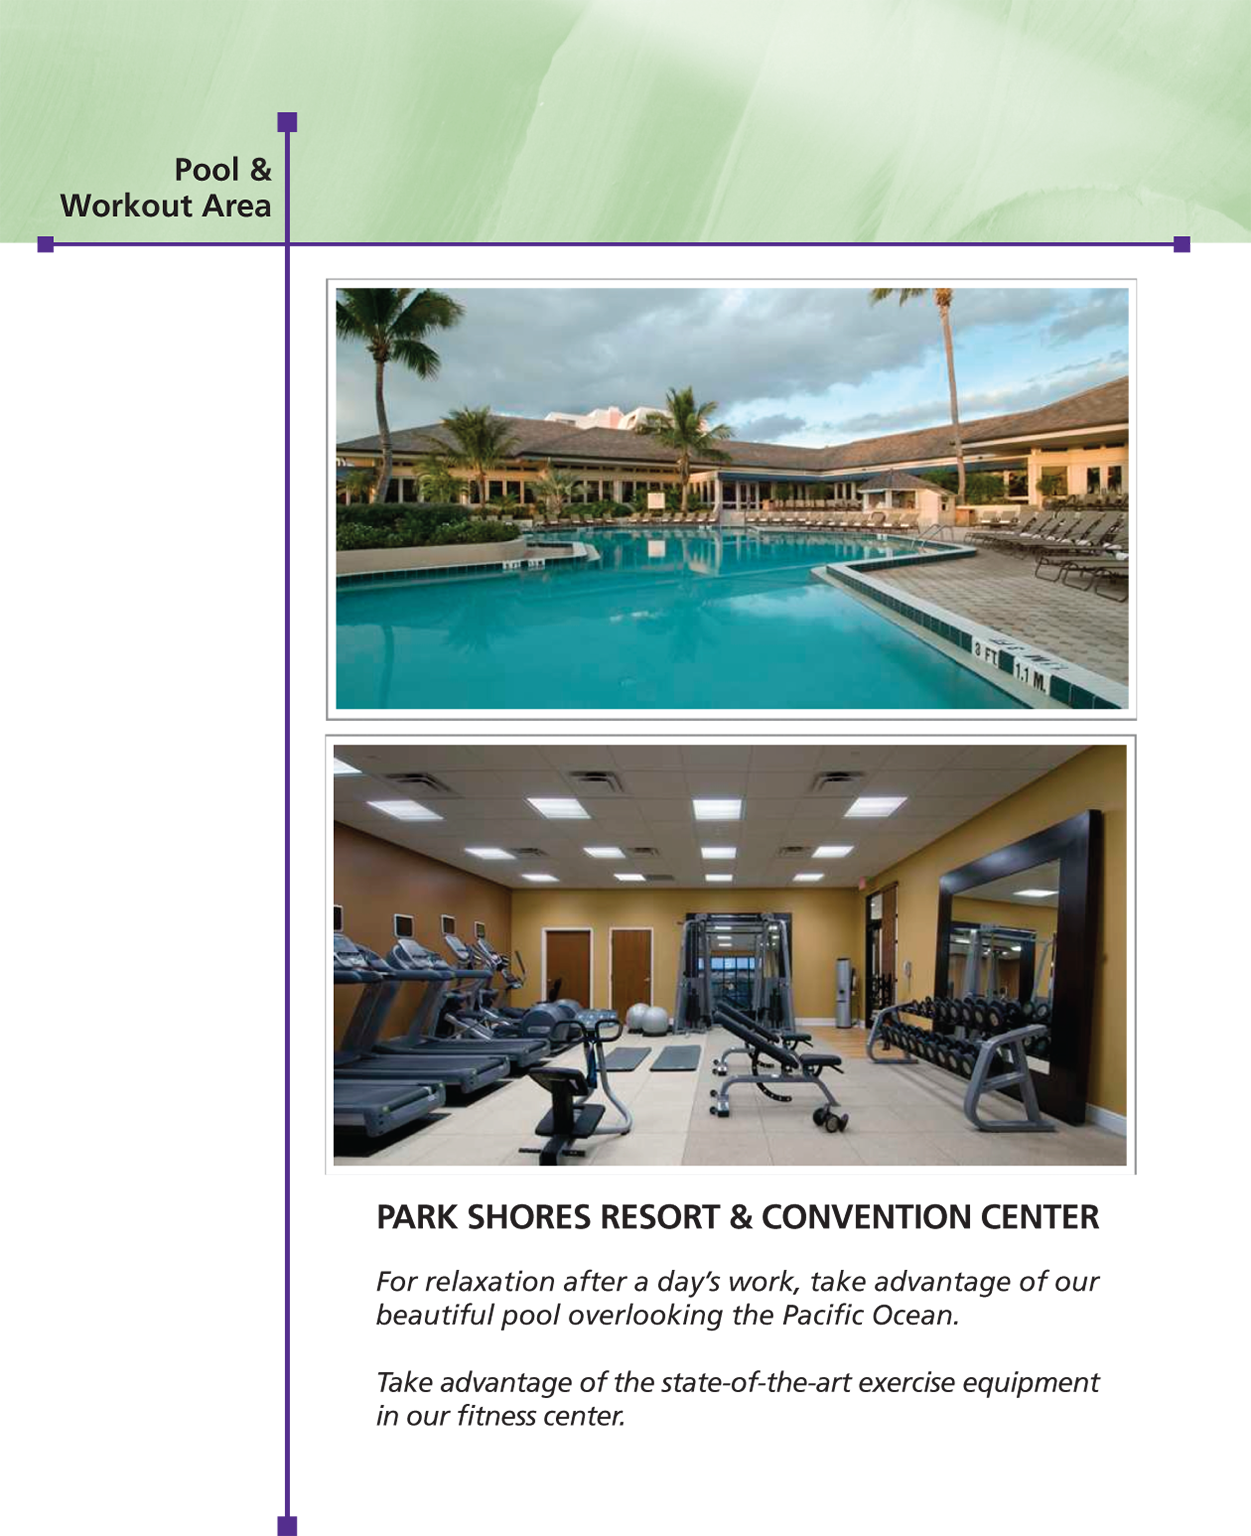 A page titled “Pool and Workout area” shows two photos and a text at the bottom.